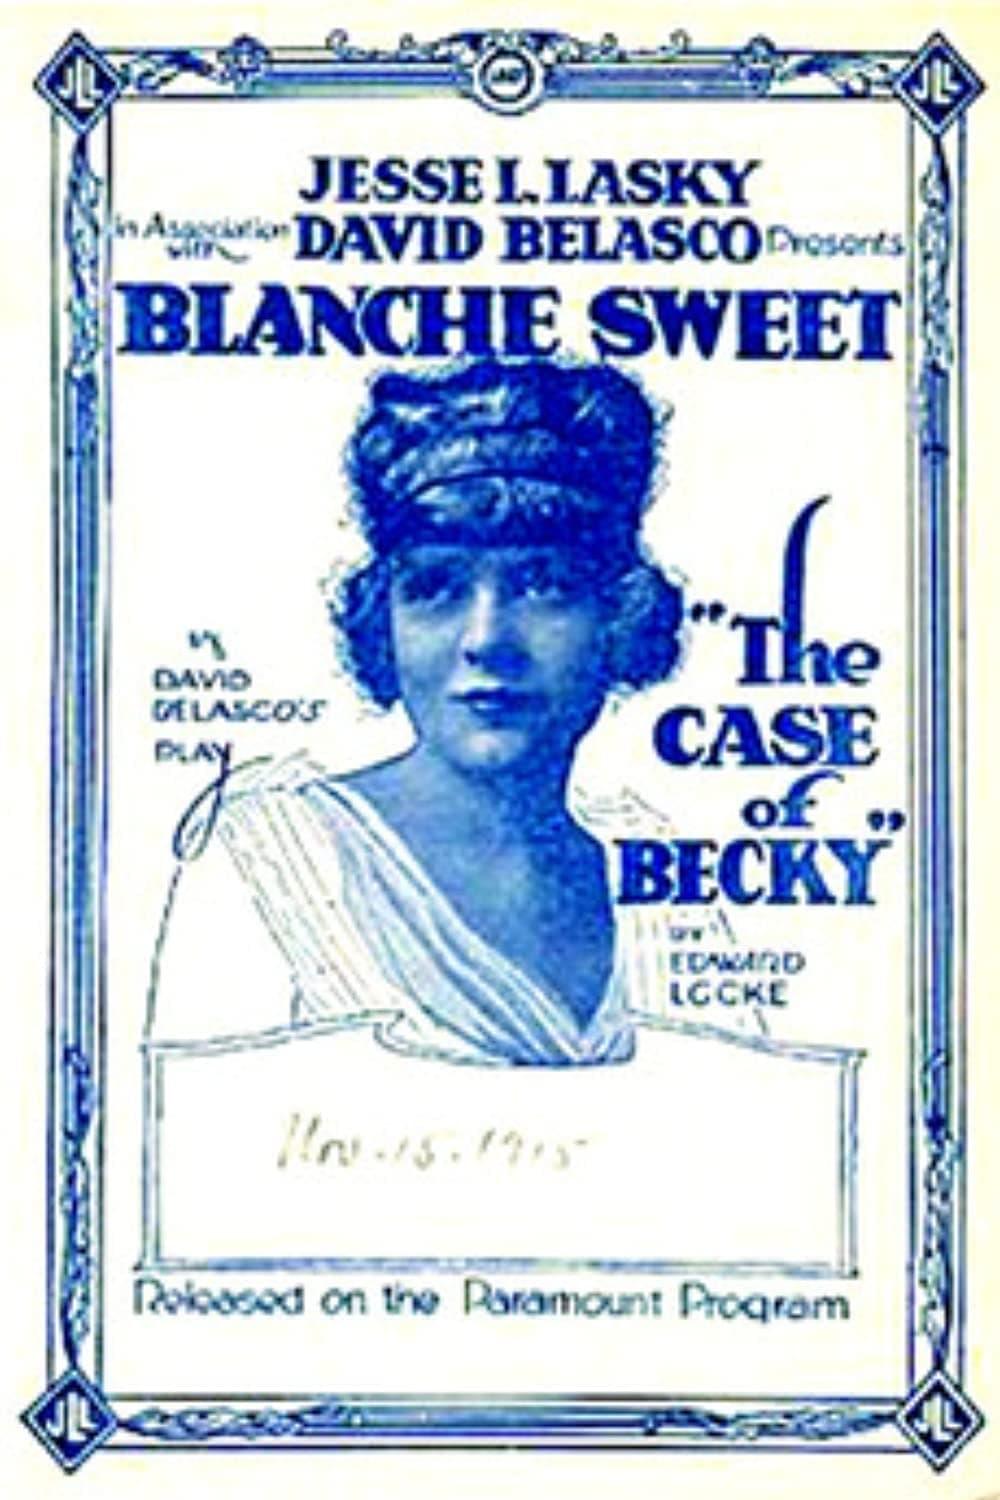 The Case of Becky poster